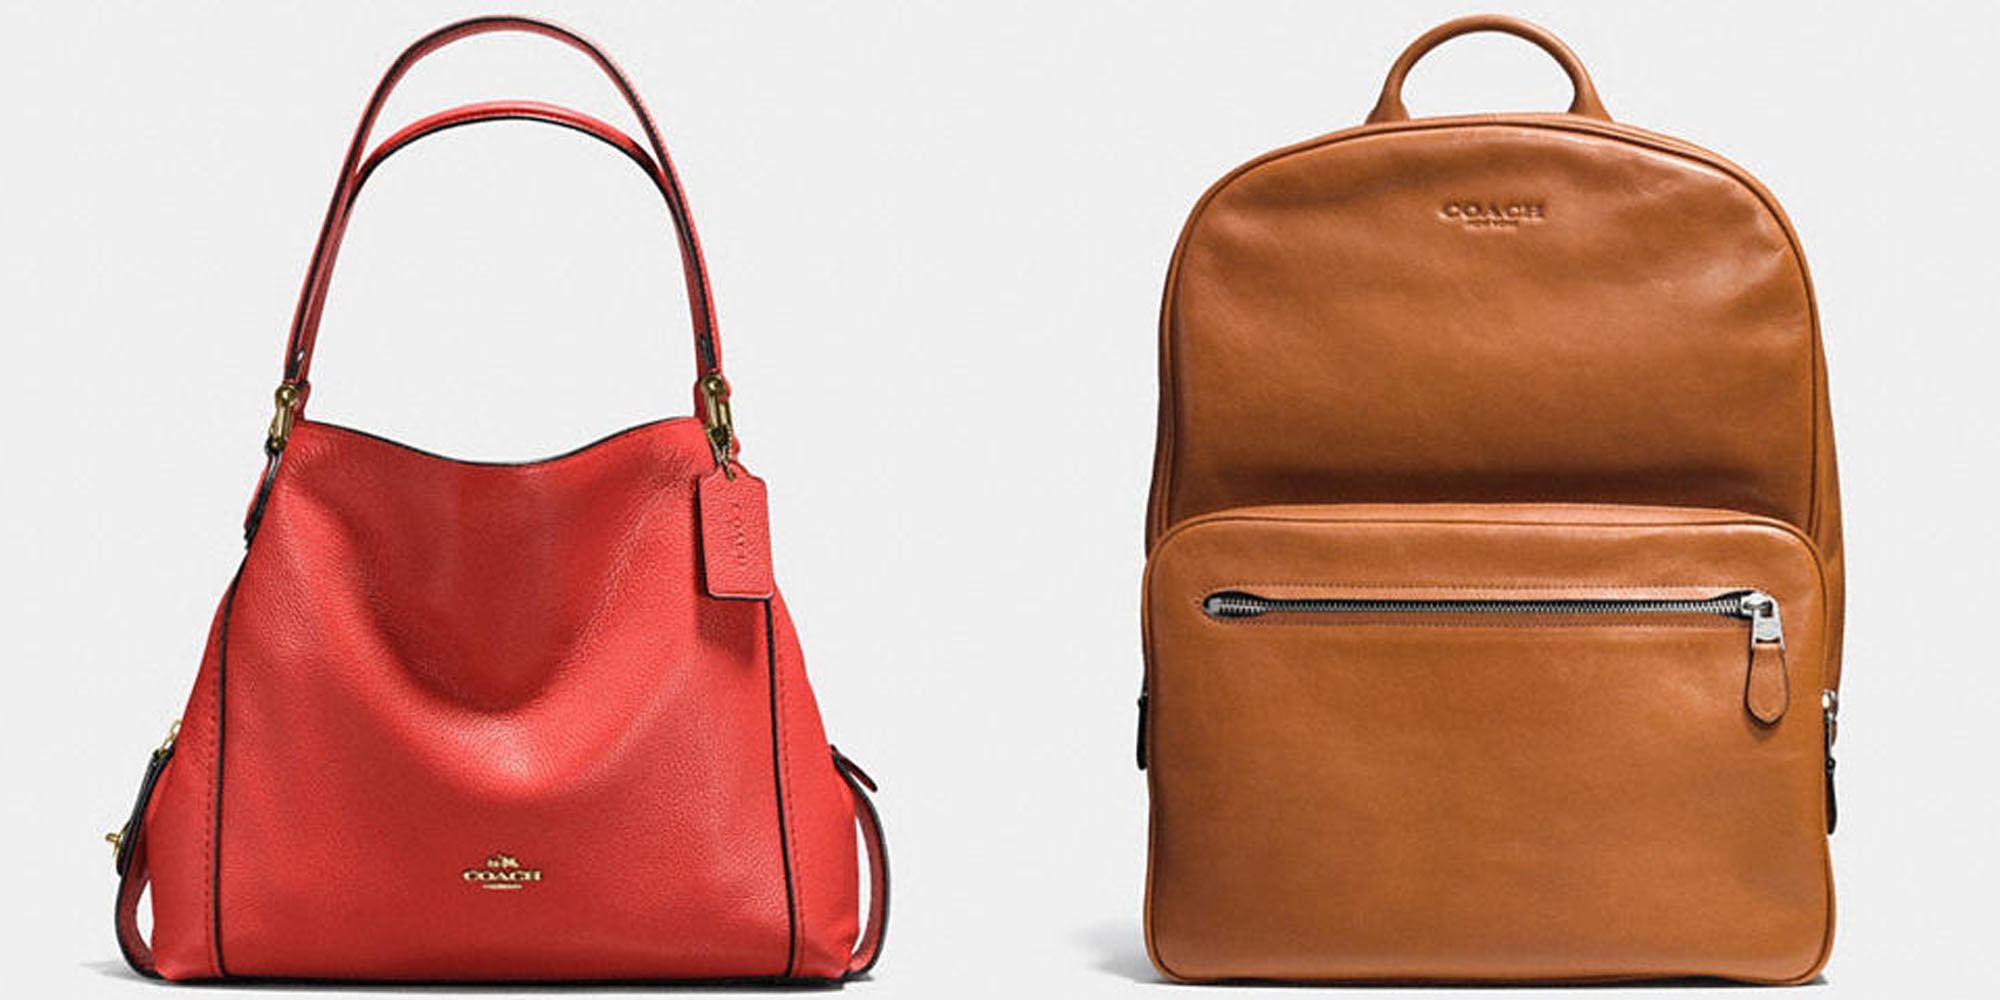 Coach 50% off Summer Sale is here, save on purses, accessories and more! - 9to5Toys